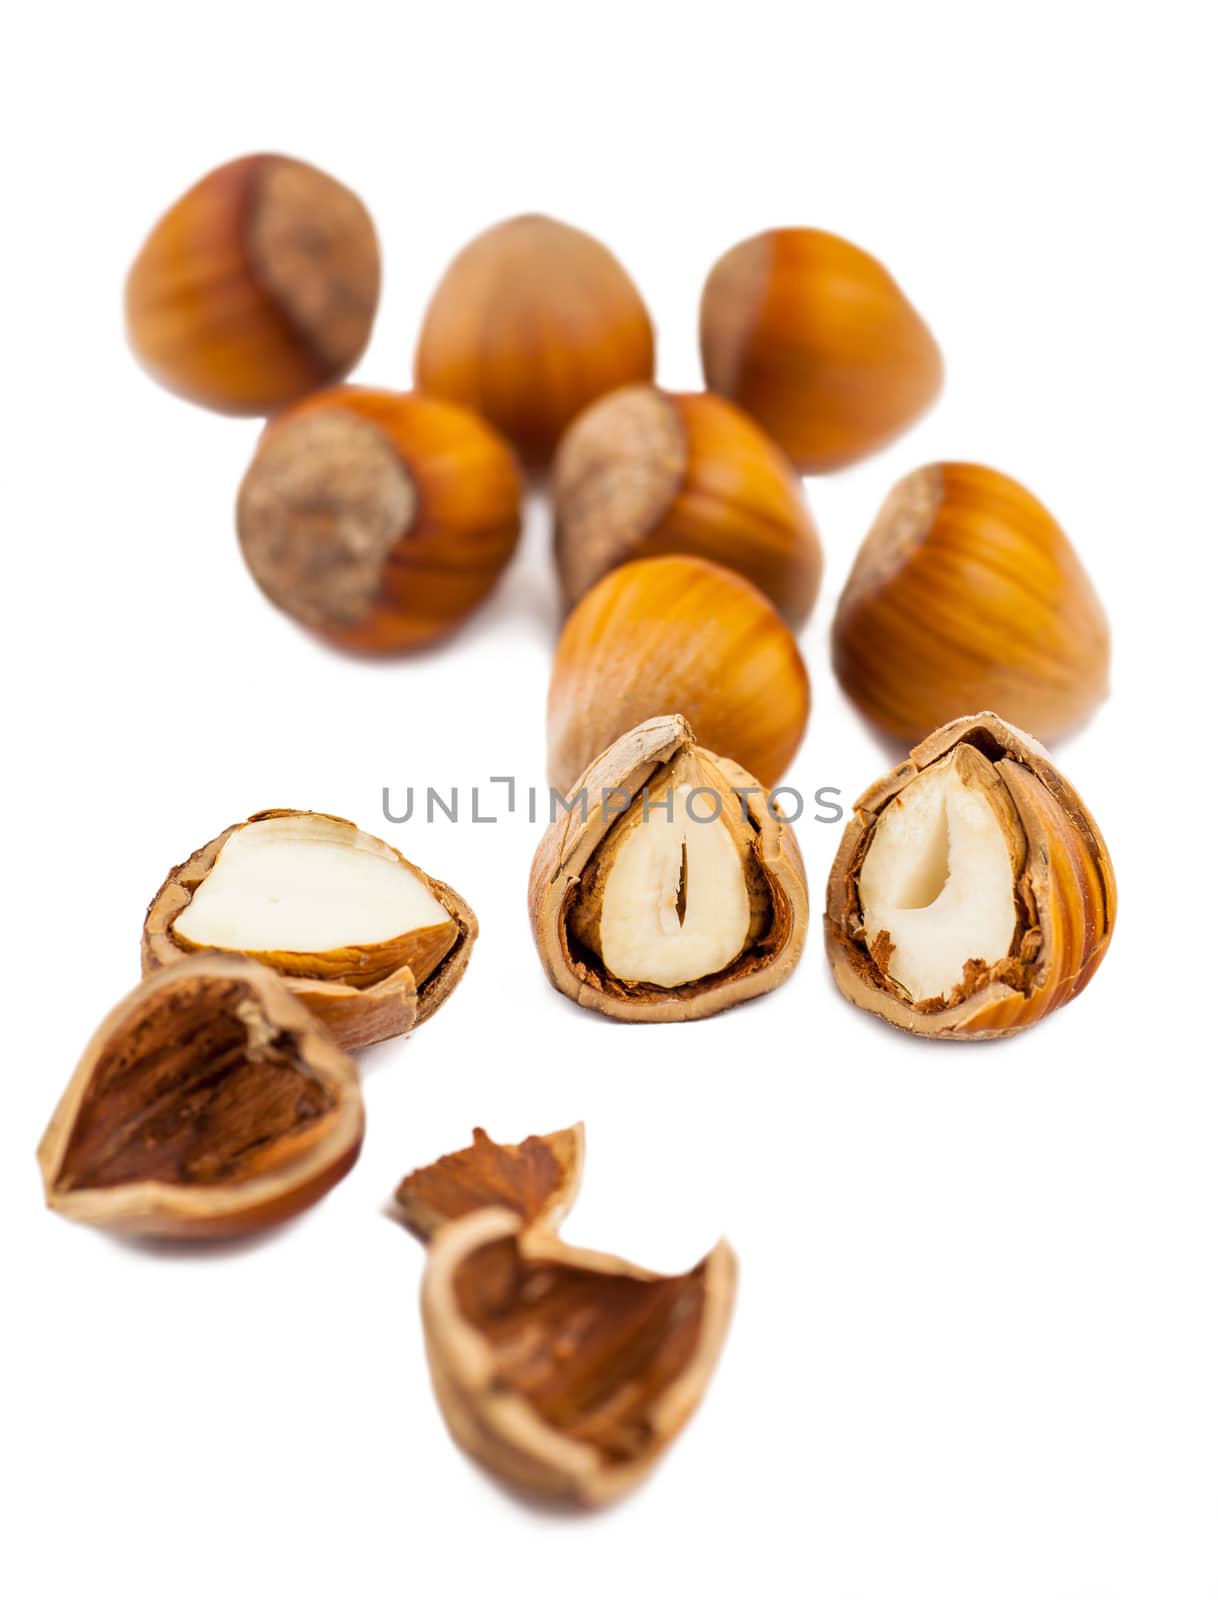 whole and split hazelnuts  by MegaArt